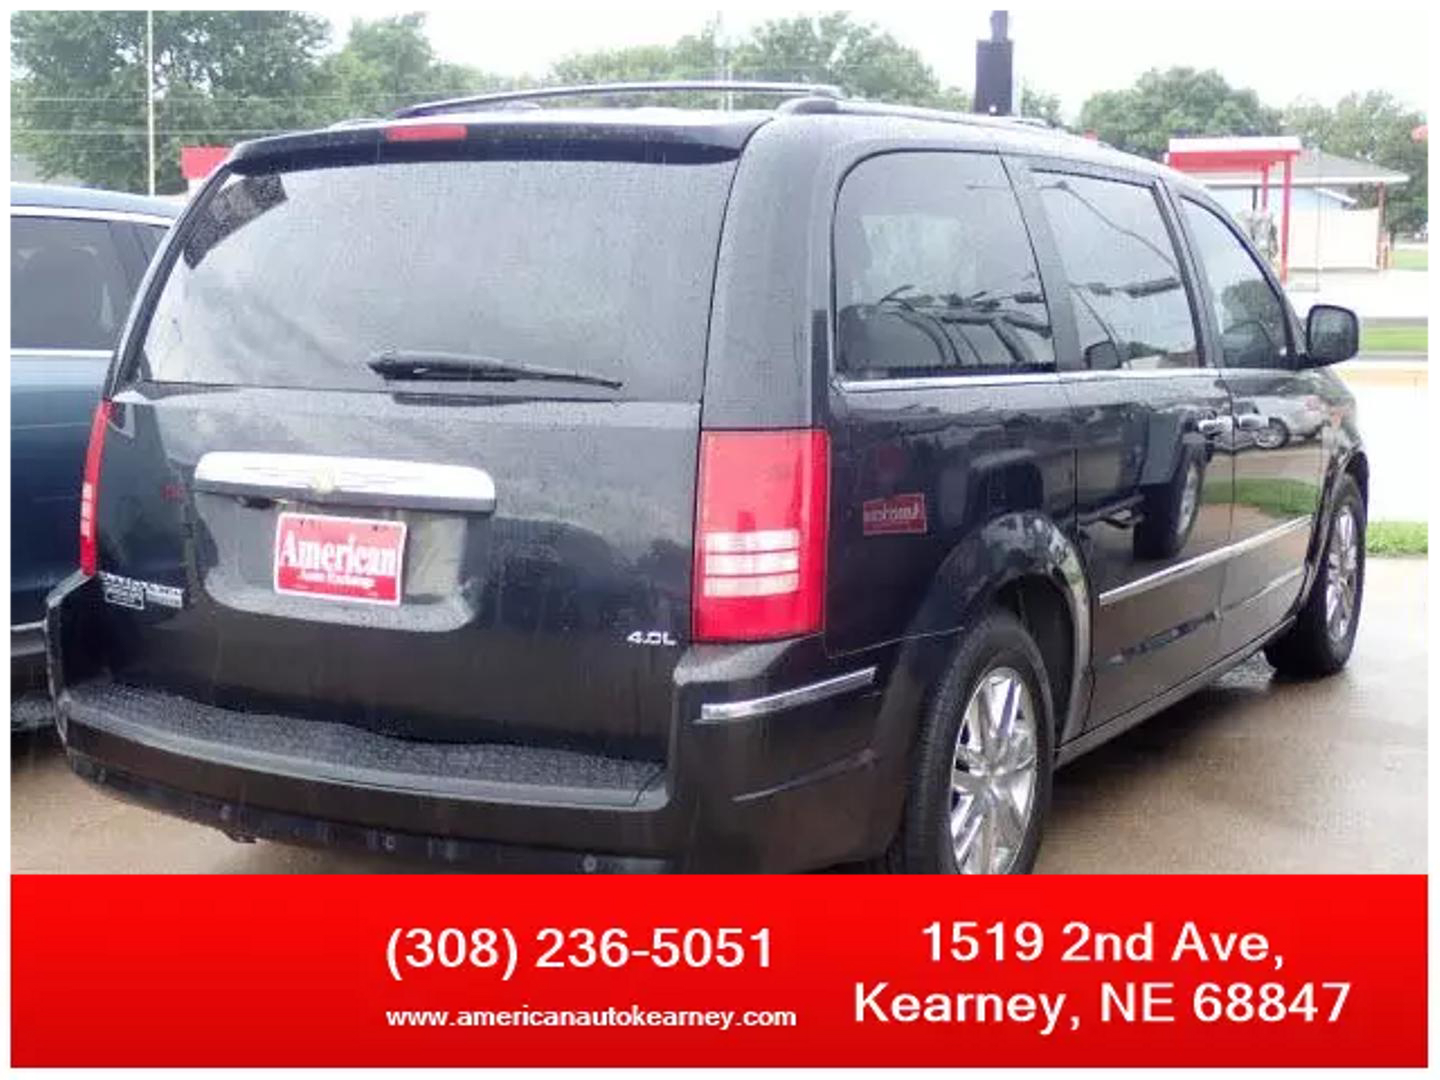 USED CHRYSLER TOWN & COUNTRY 2008 for sale in Kearney, NE